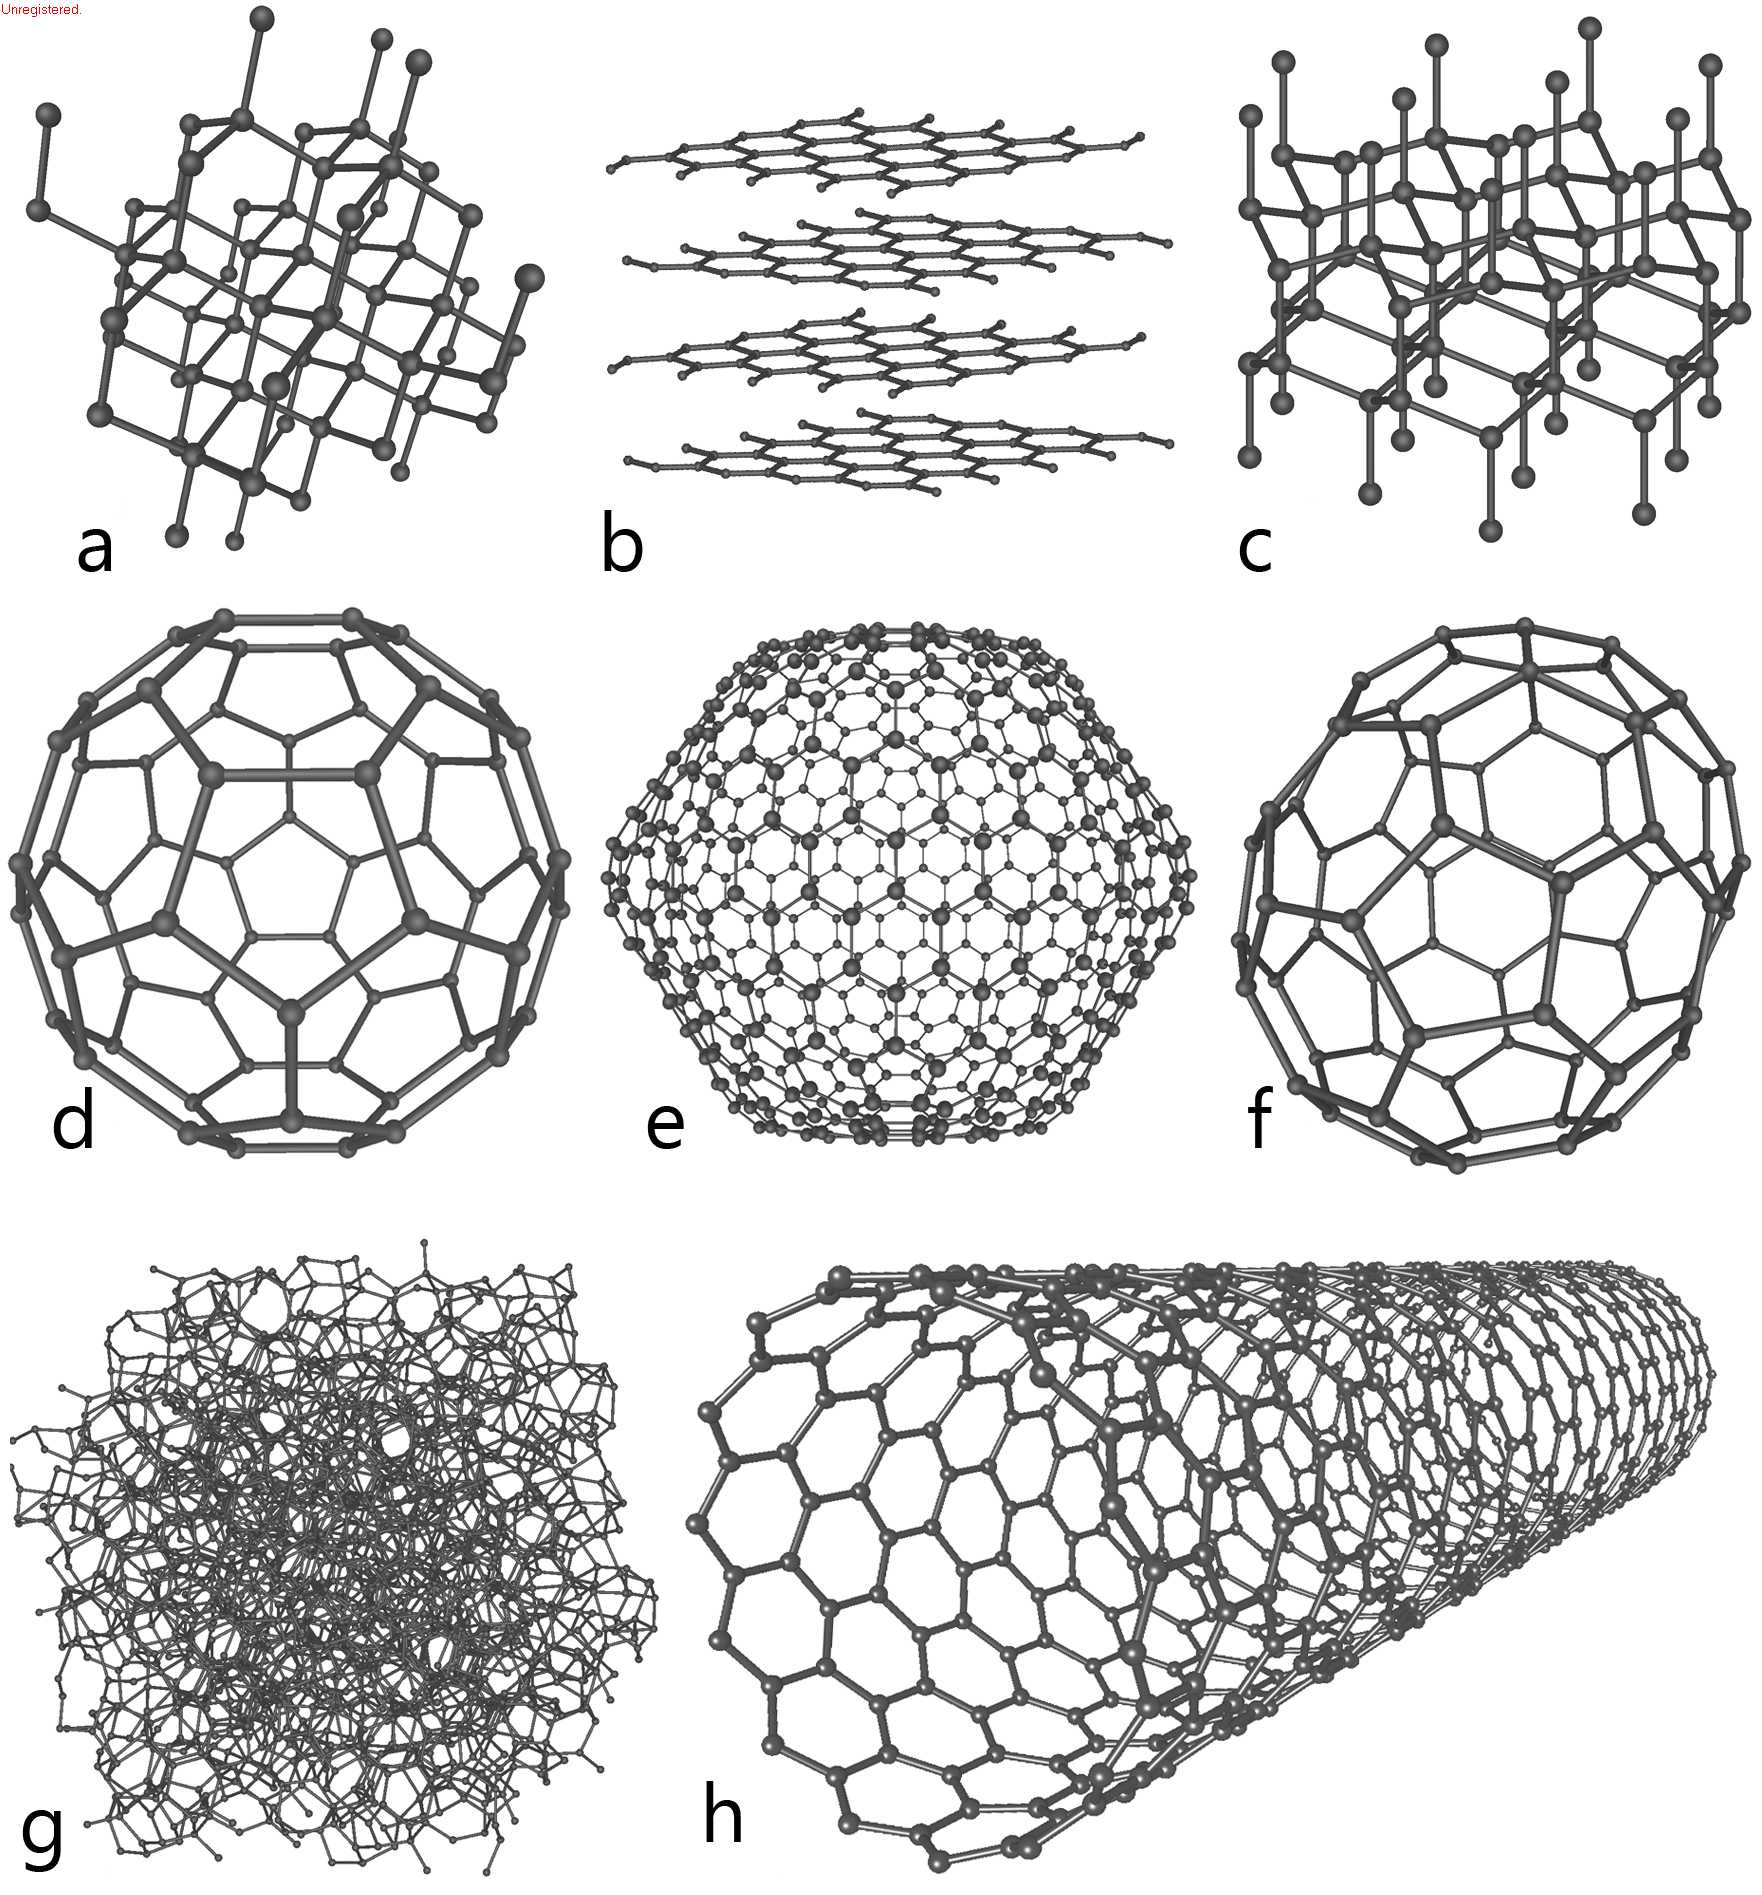 What is the link between diamond, graphite and buckyballs